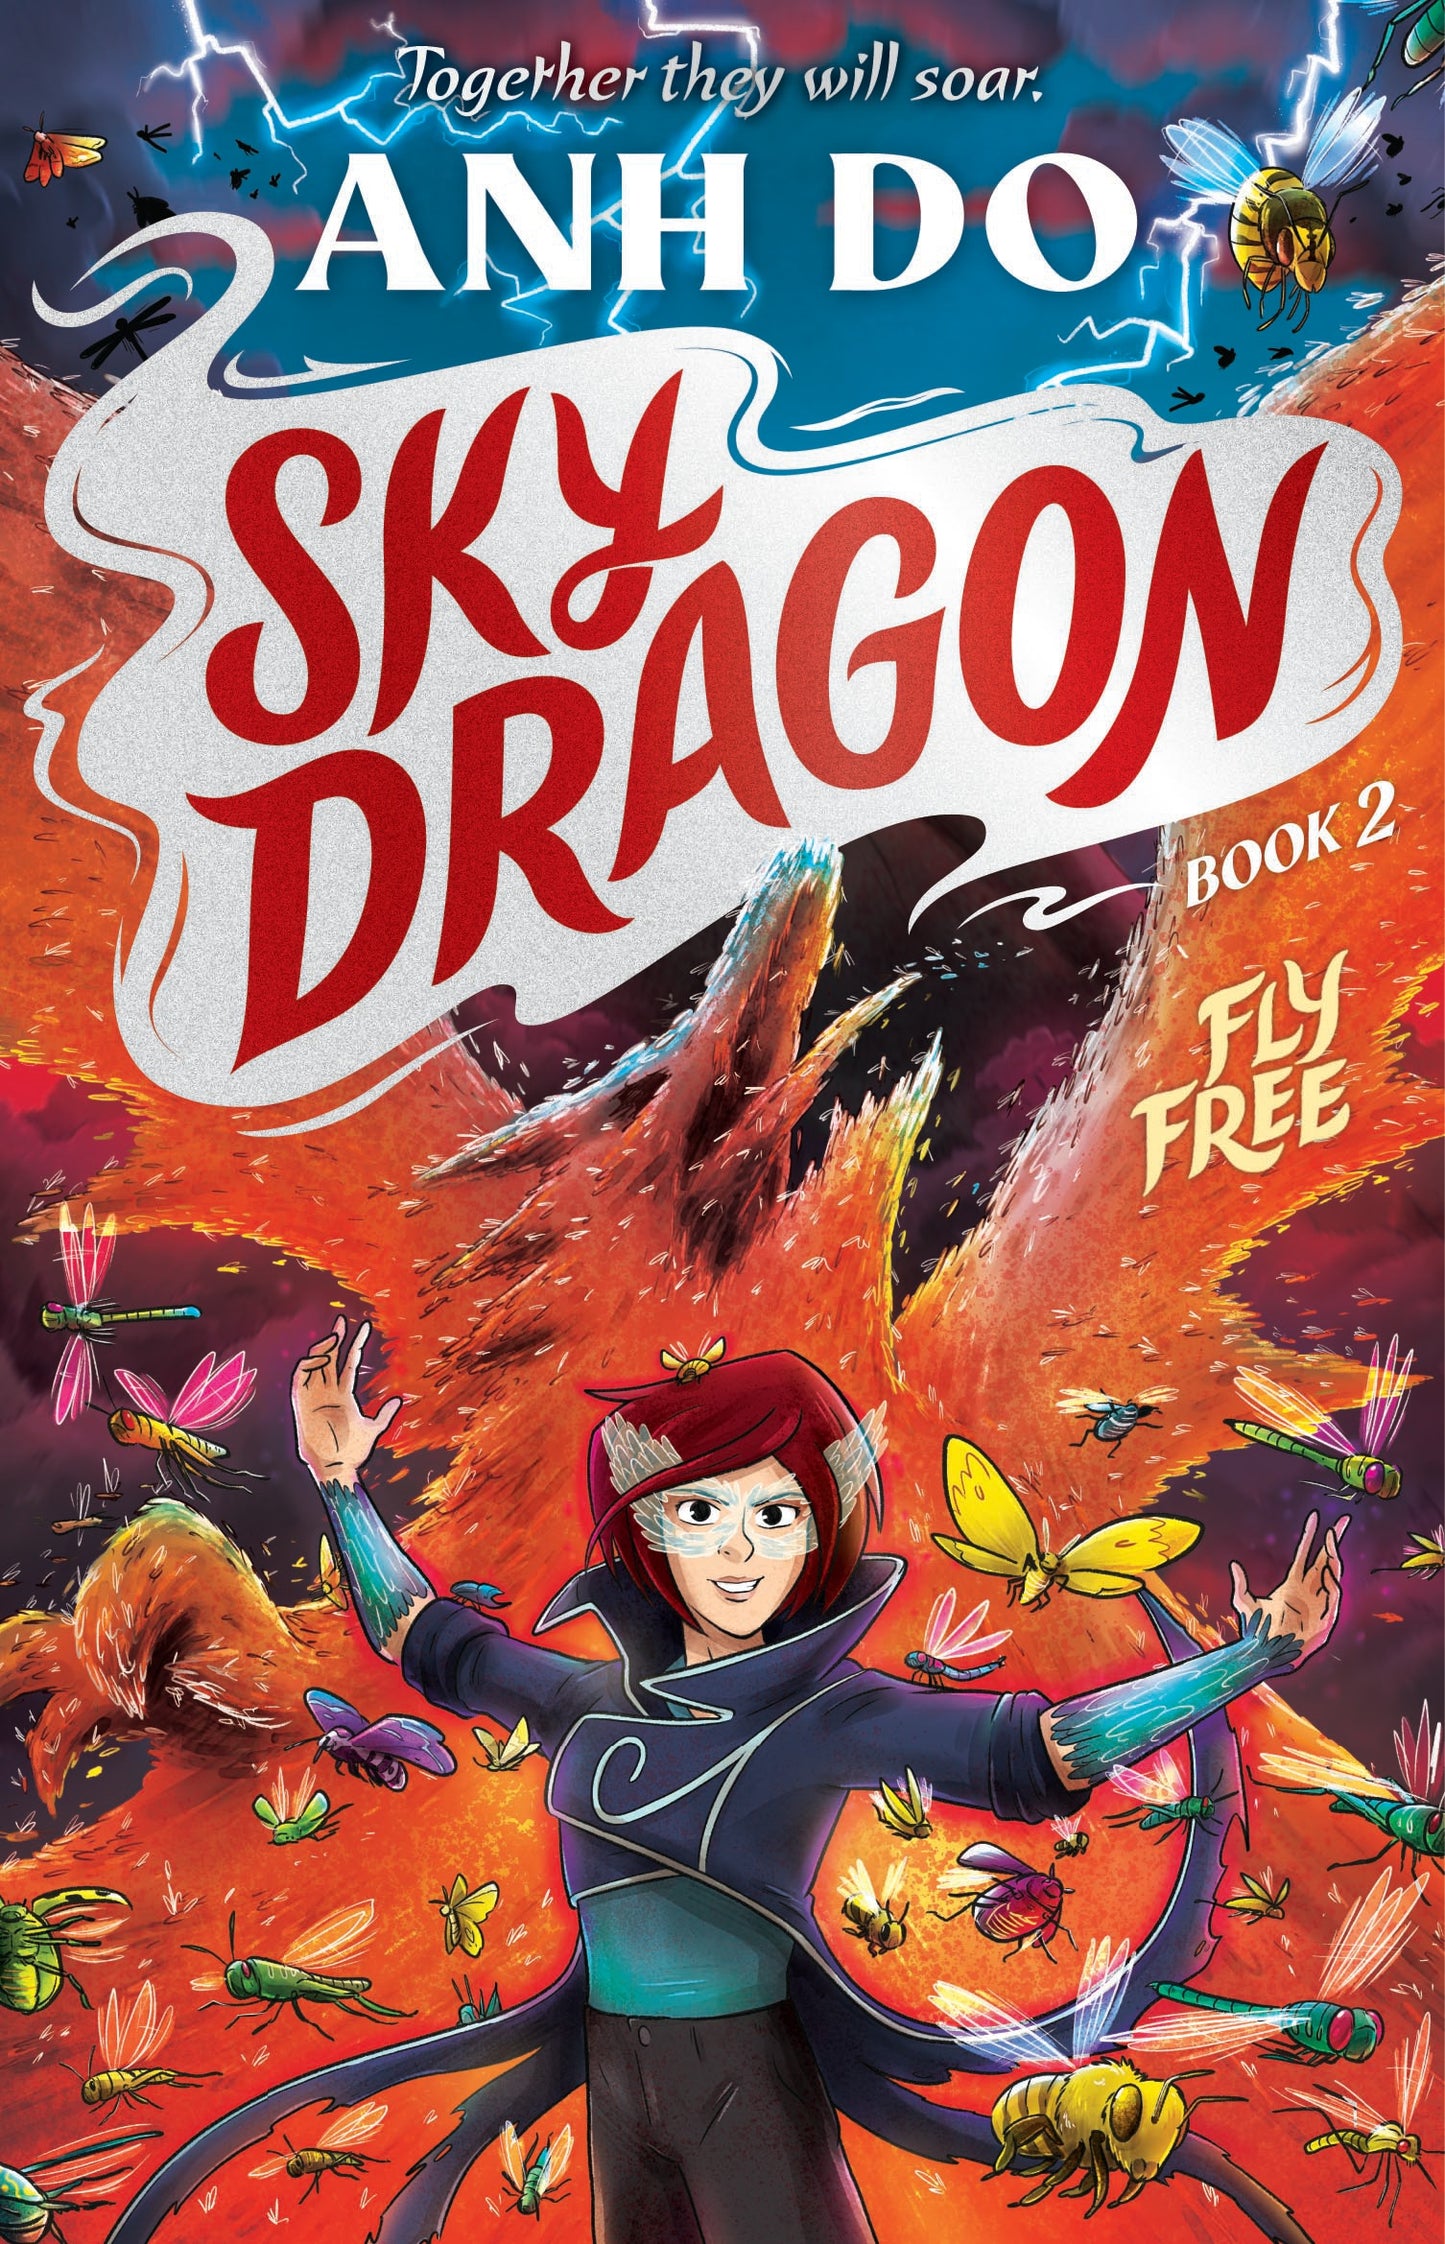 Skydragon 2: Fly Free by Anh Do - City Books & Lotto